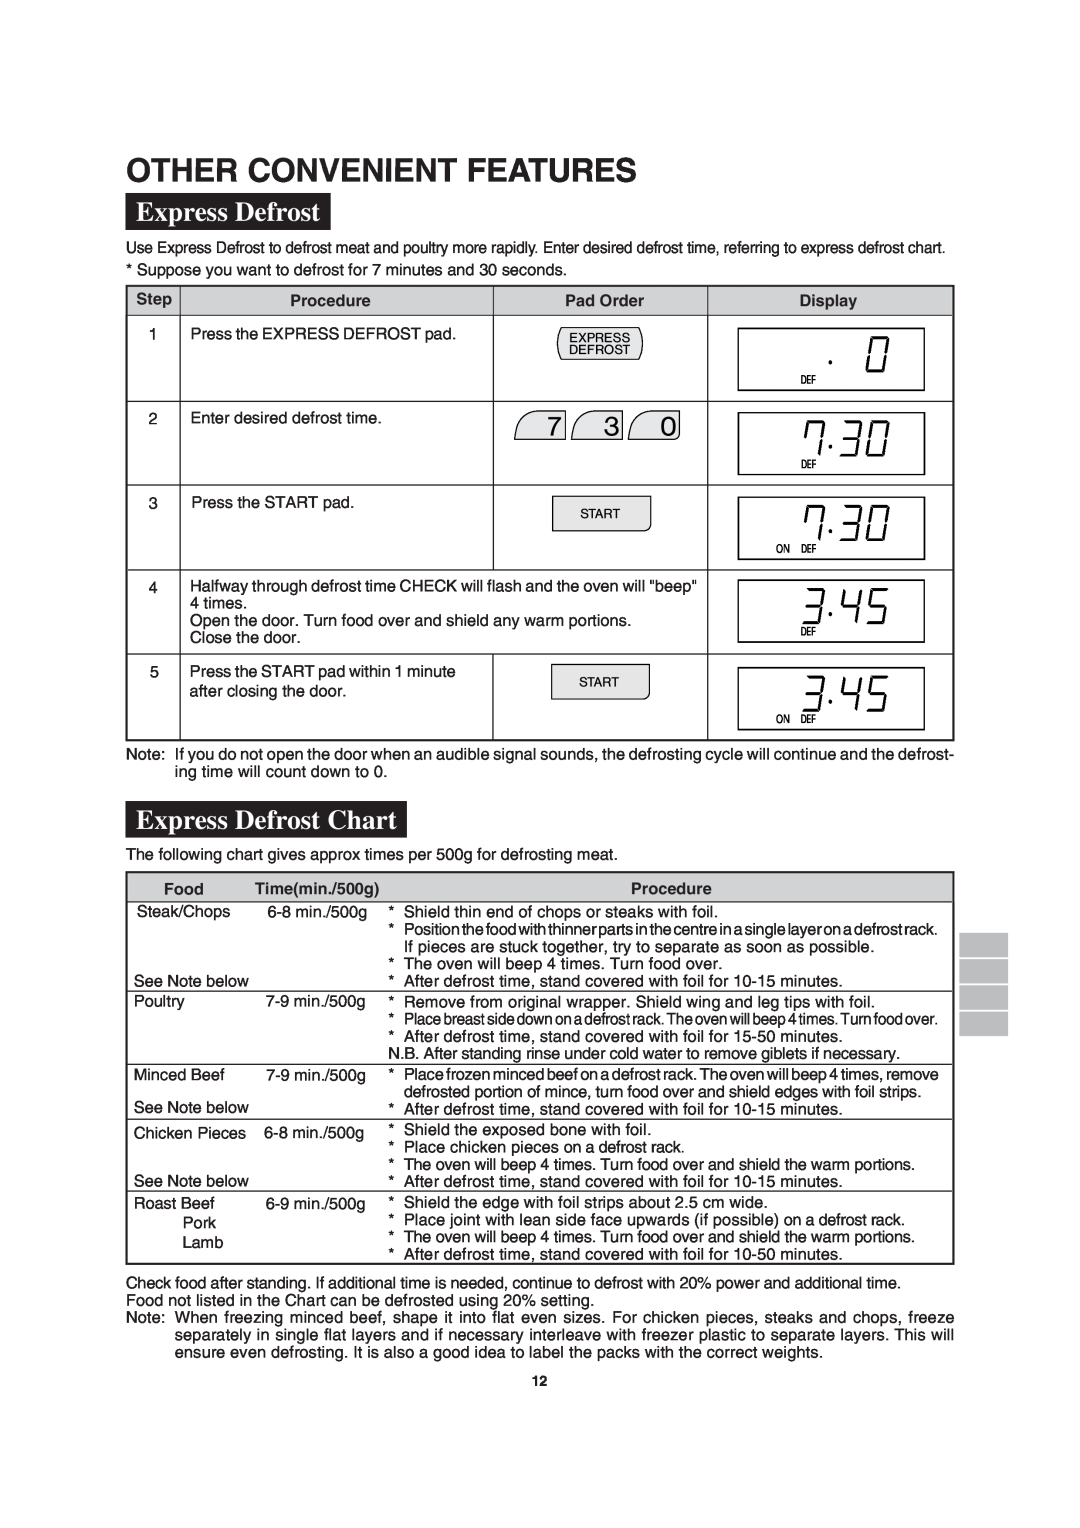 Sharp MODEL R-2197 operation manual Other Convenient Features, Express Defrost Chart 